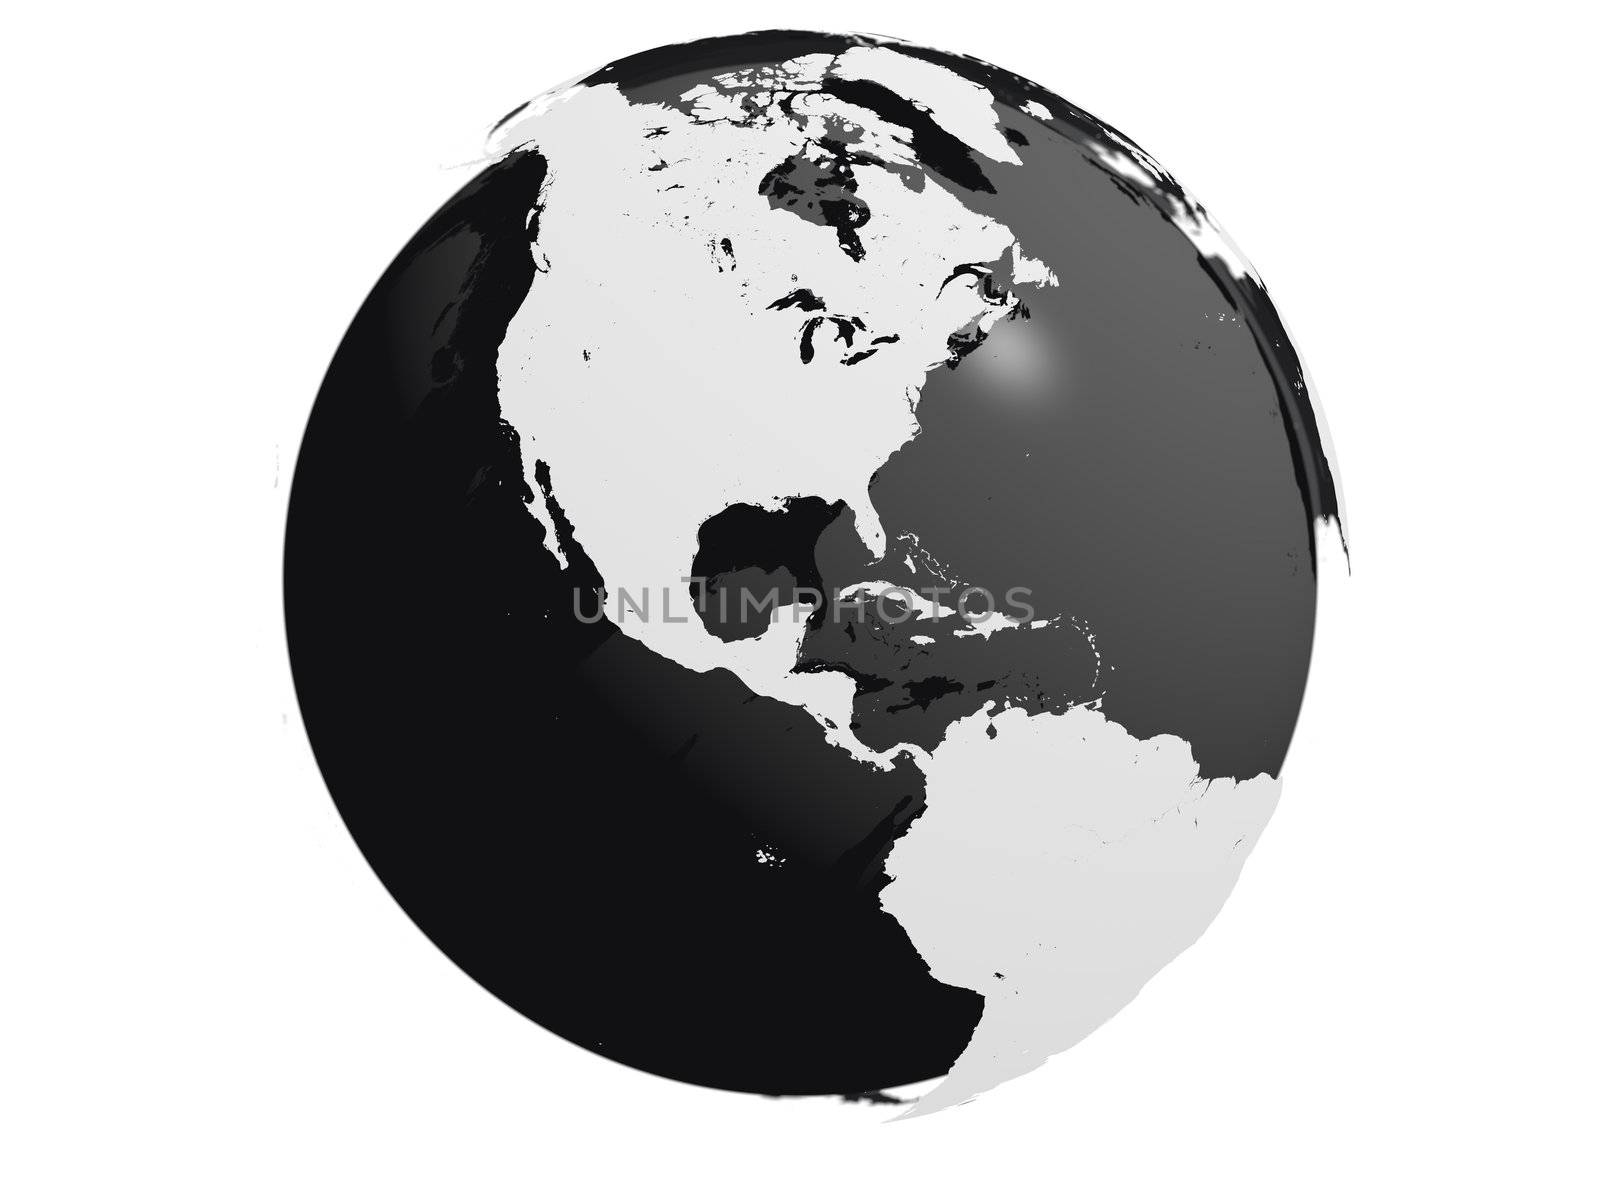 Model of Earth with black core and continents hovering over the sphere. World map provided by visibleearth.nasa.gov